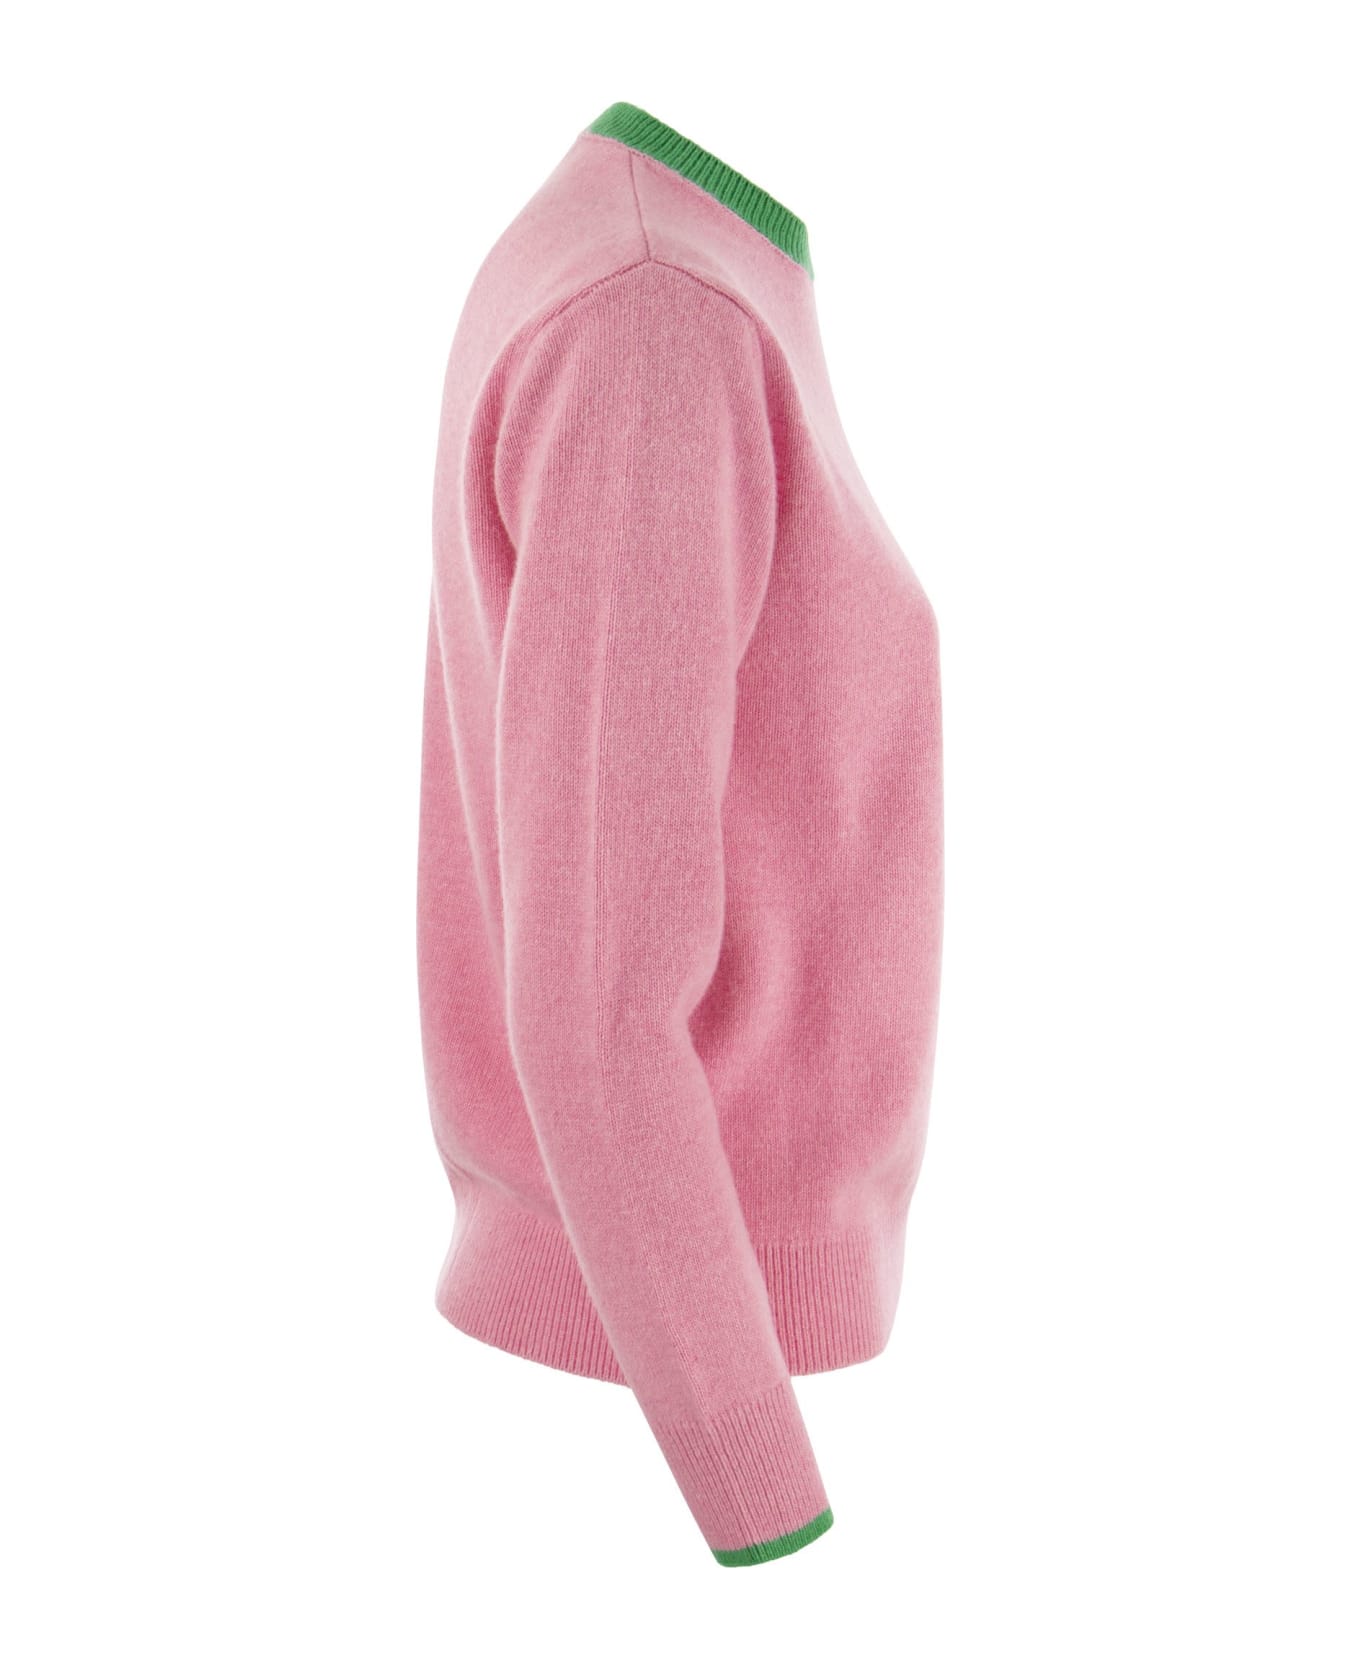 MC2 Saint Barth Wool And Cashmere Blend Jumper With Vodka Vs Yoga Embroidery - Pink ニットウェア